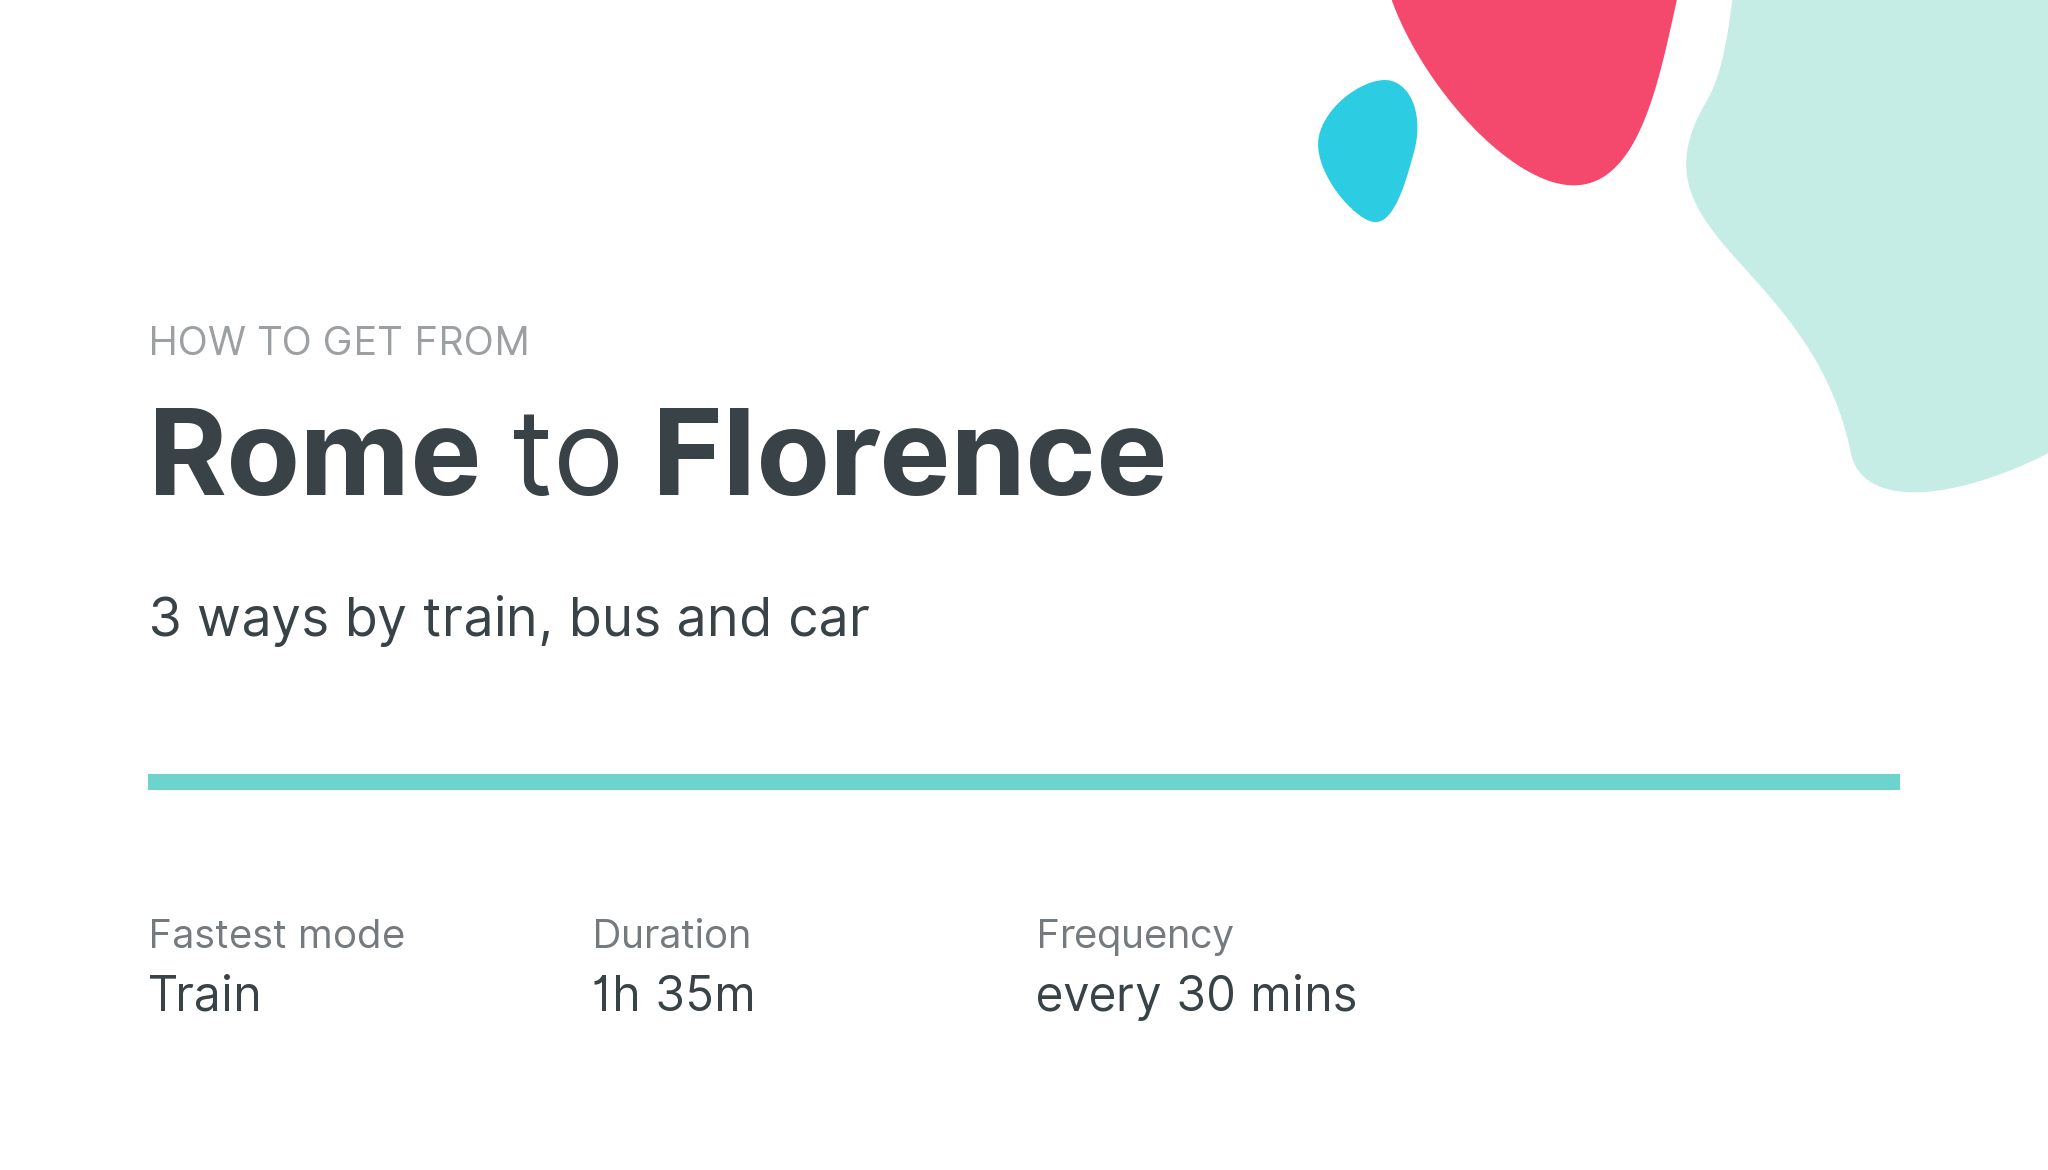 How do I get from Rome to Florence